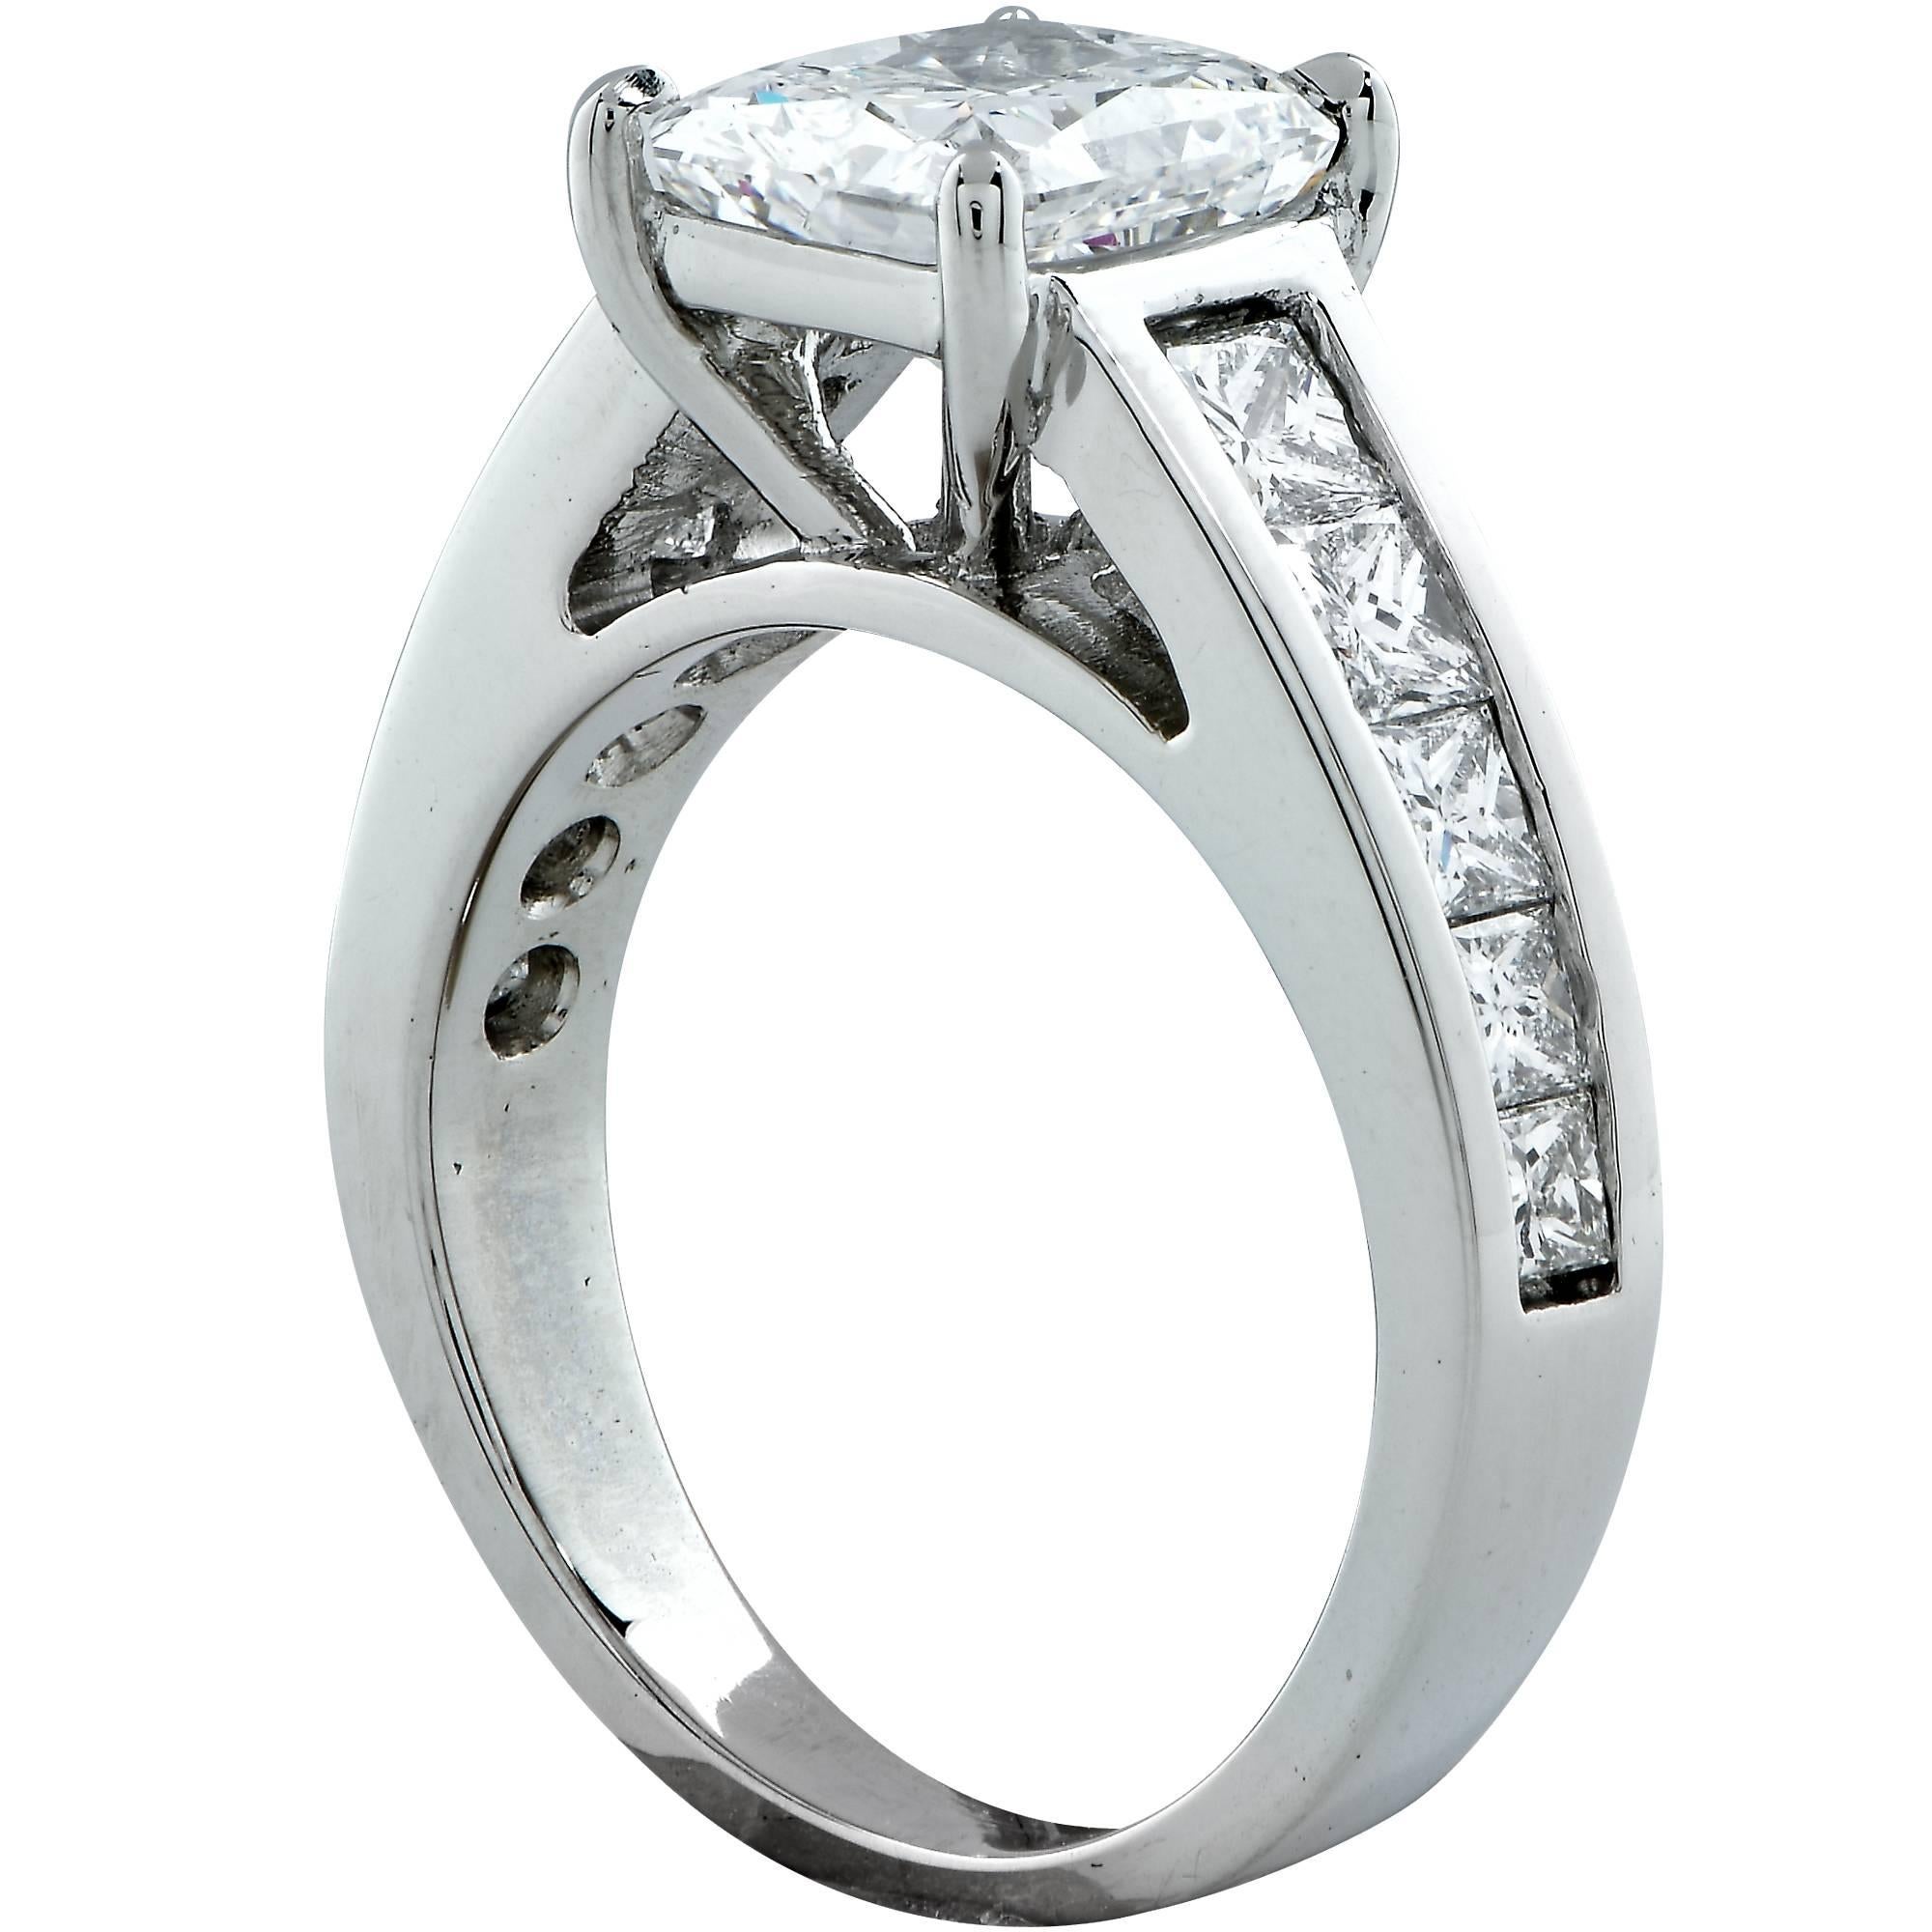 Platinum custom made ring featuring a GIA graded 2.01ct F color and SI2 clarity radiant cut diamond with excellent polish and very good symmetry. Flanked by 10 princess cut diamonds weighing approximately 1ct total F color and VS clarity. 

The ring